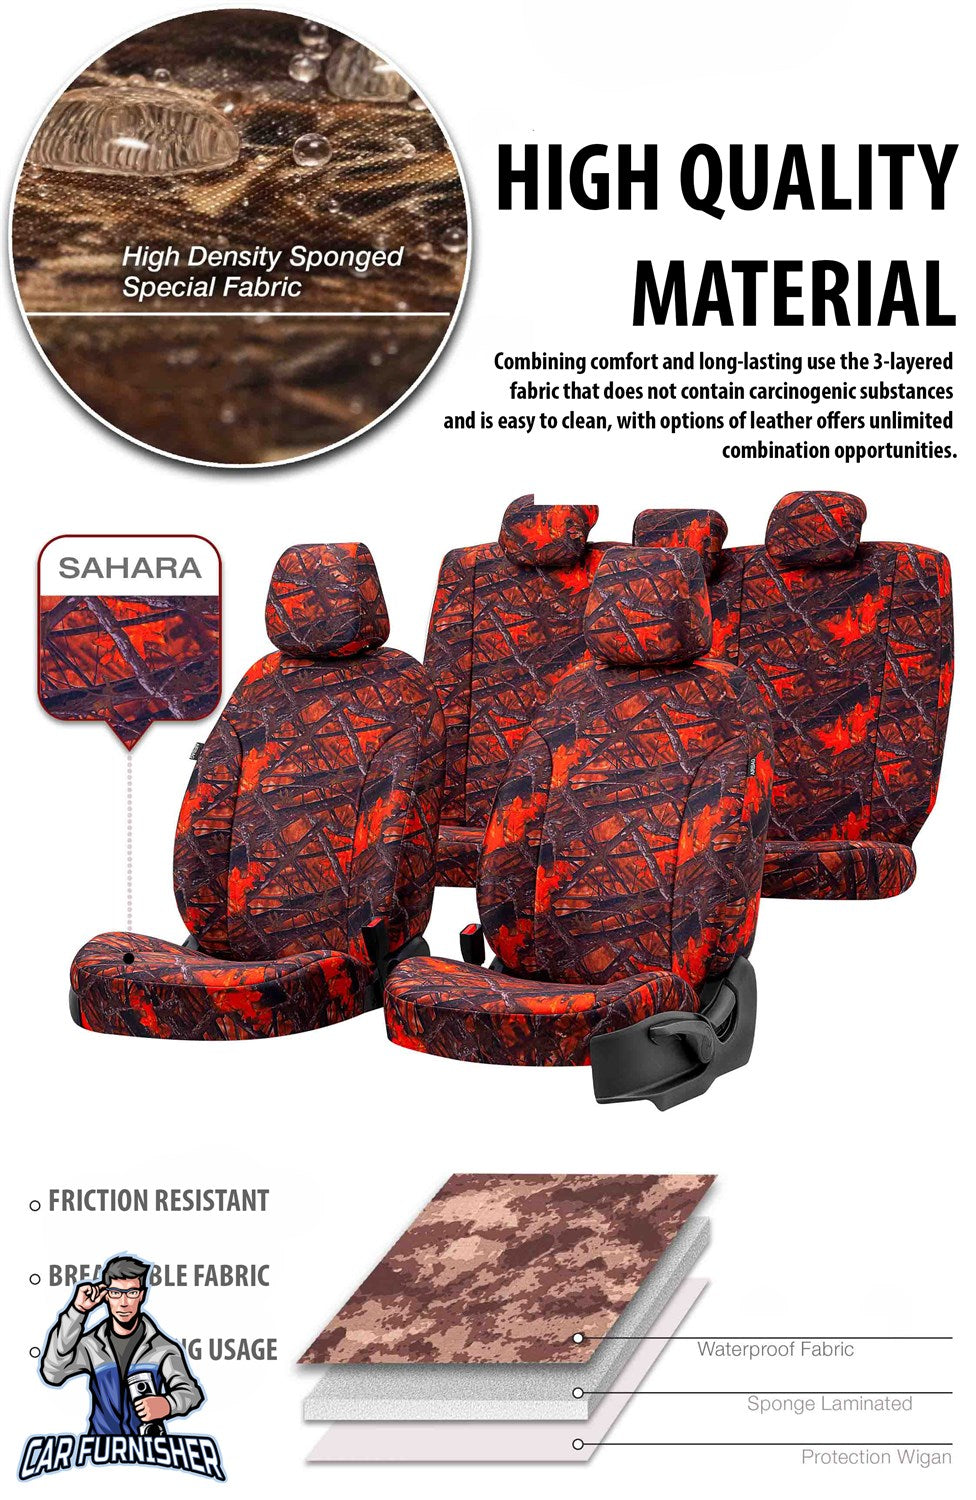 Opel Frontera Seat Cover Camouflage Waterproof Design Montblanc Camo Waterproof Fabric